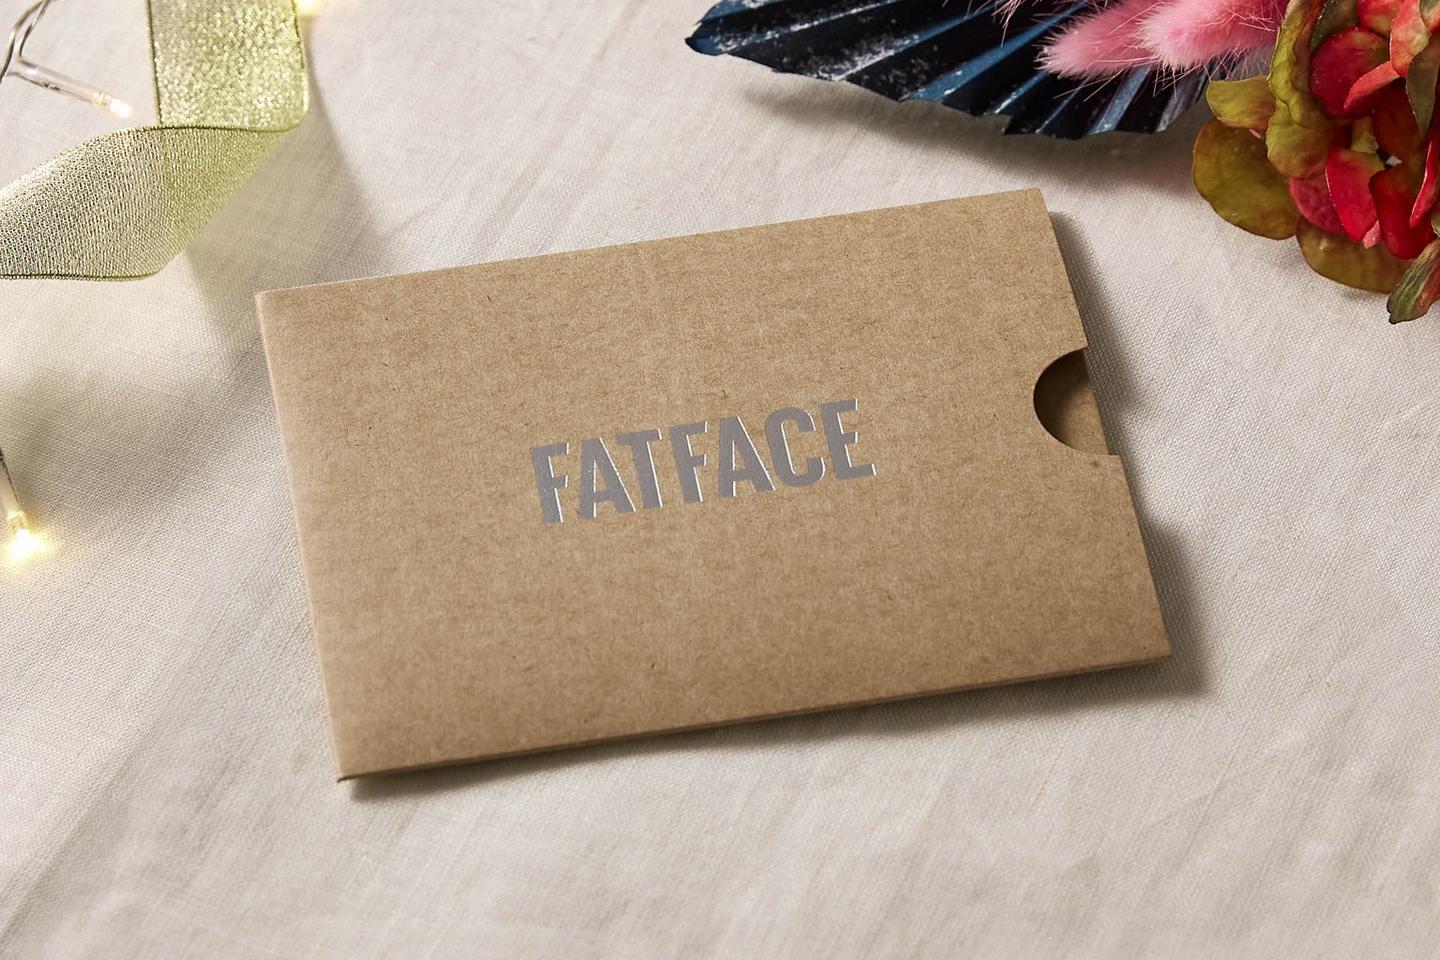 A pale brown cardboard gift card sleeve with silver foil print FatFace logo.